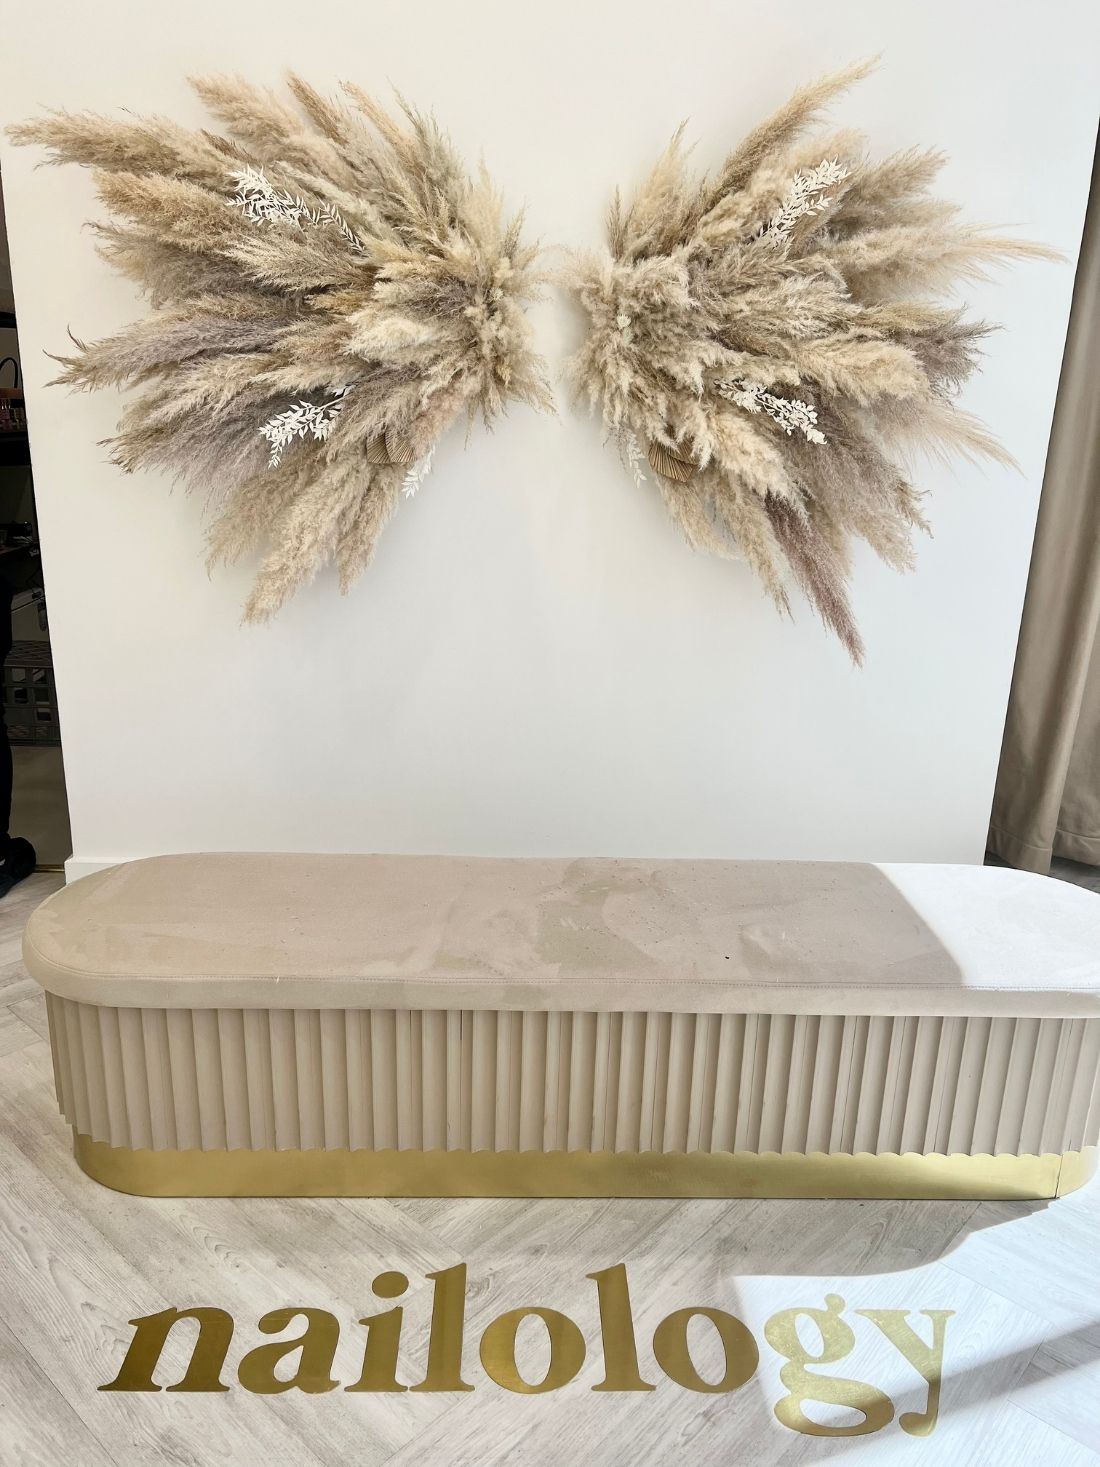 Pampas Grass Wall art in cream and tan on a nail salon wall